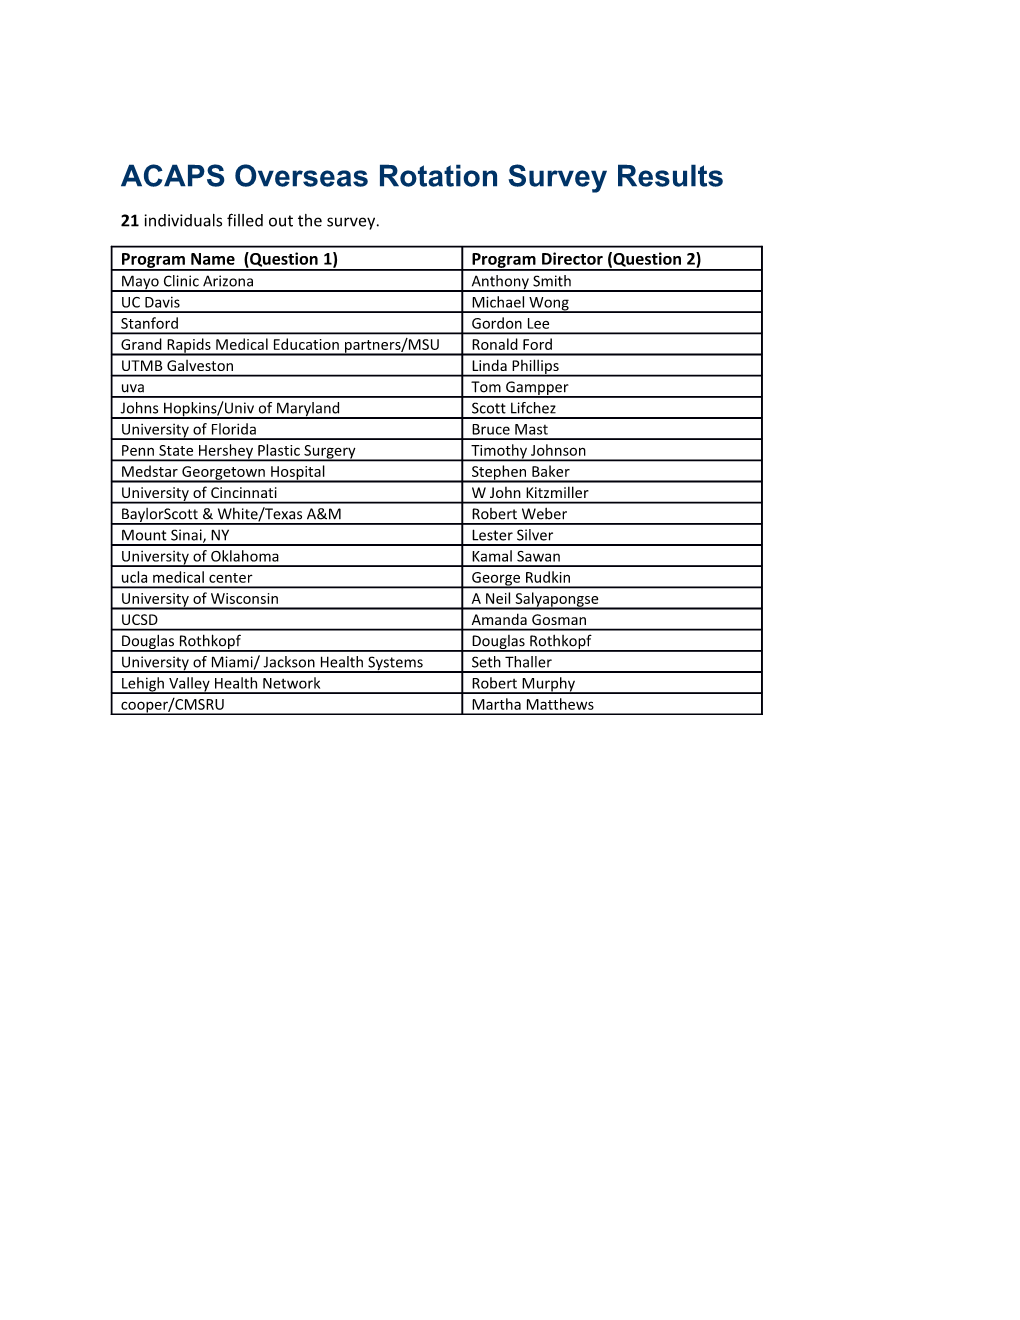 ACAPS Overseas Rotation Survey Results